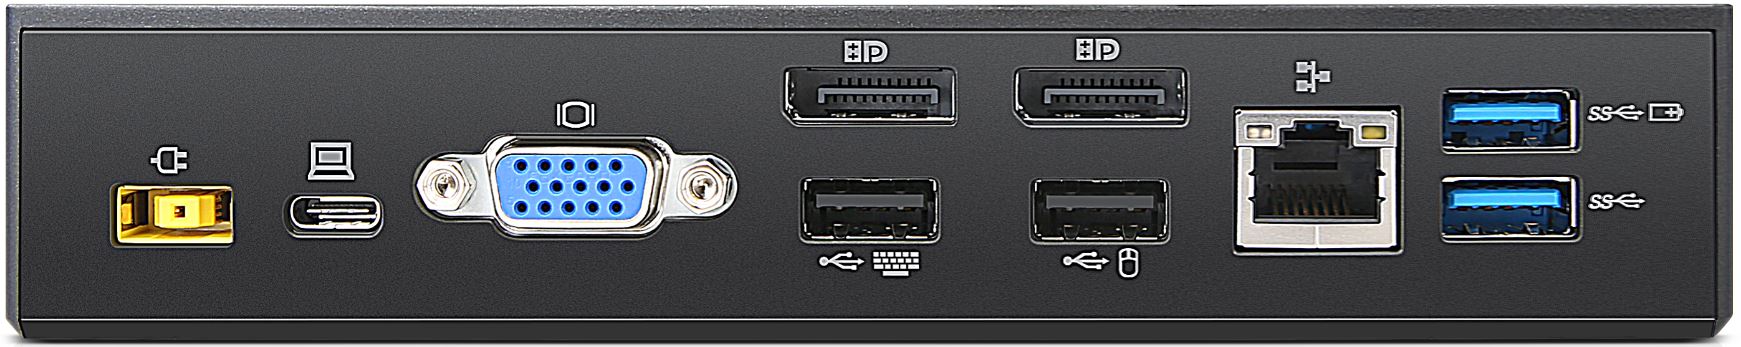 ThinkPad USB-C Dock - Overview and Service Parts - Lenovo Support UU